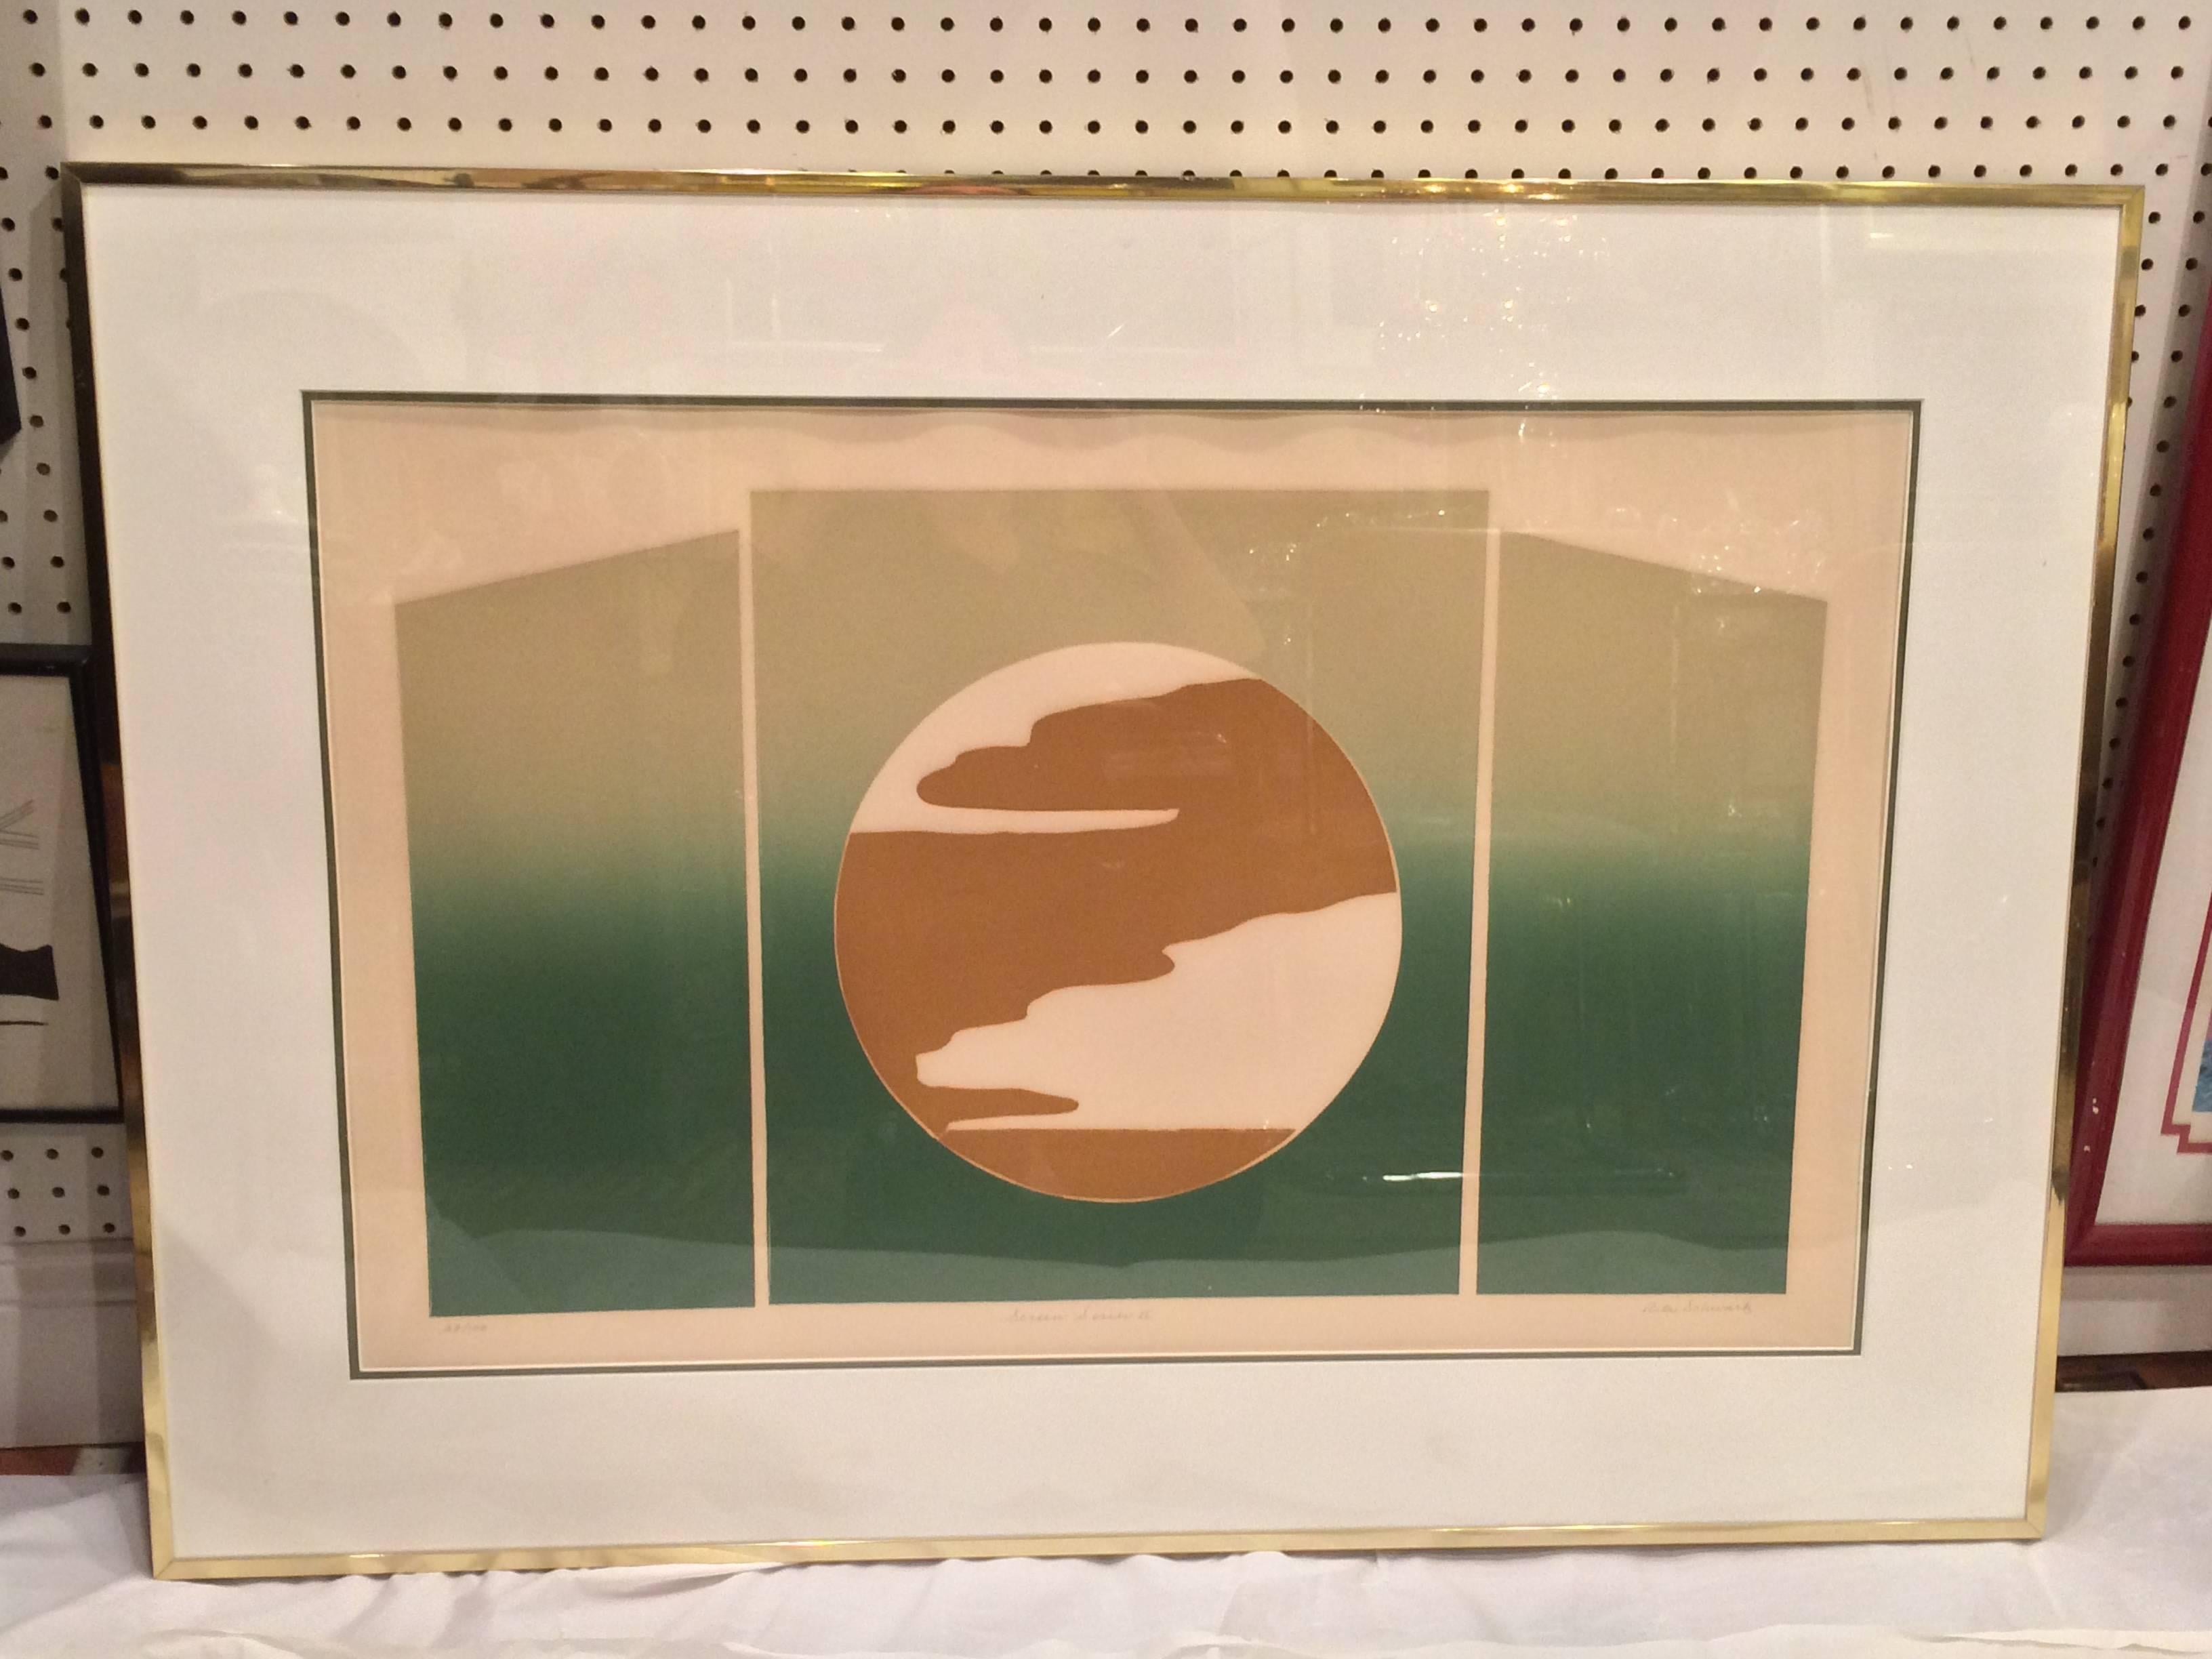 Mid Century Post Modern Signed and numbered silk screen By Rita Schwartz. Matted and framed and in very good condition. Nice, Large affordable piece of original art. This item is too fragile to go parcel. Recommended for white glove delivery.